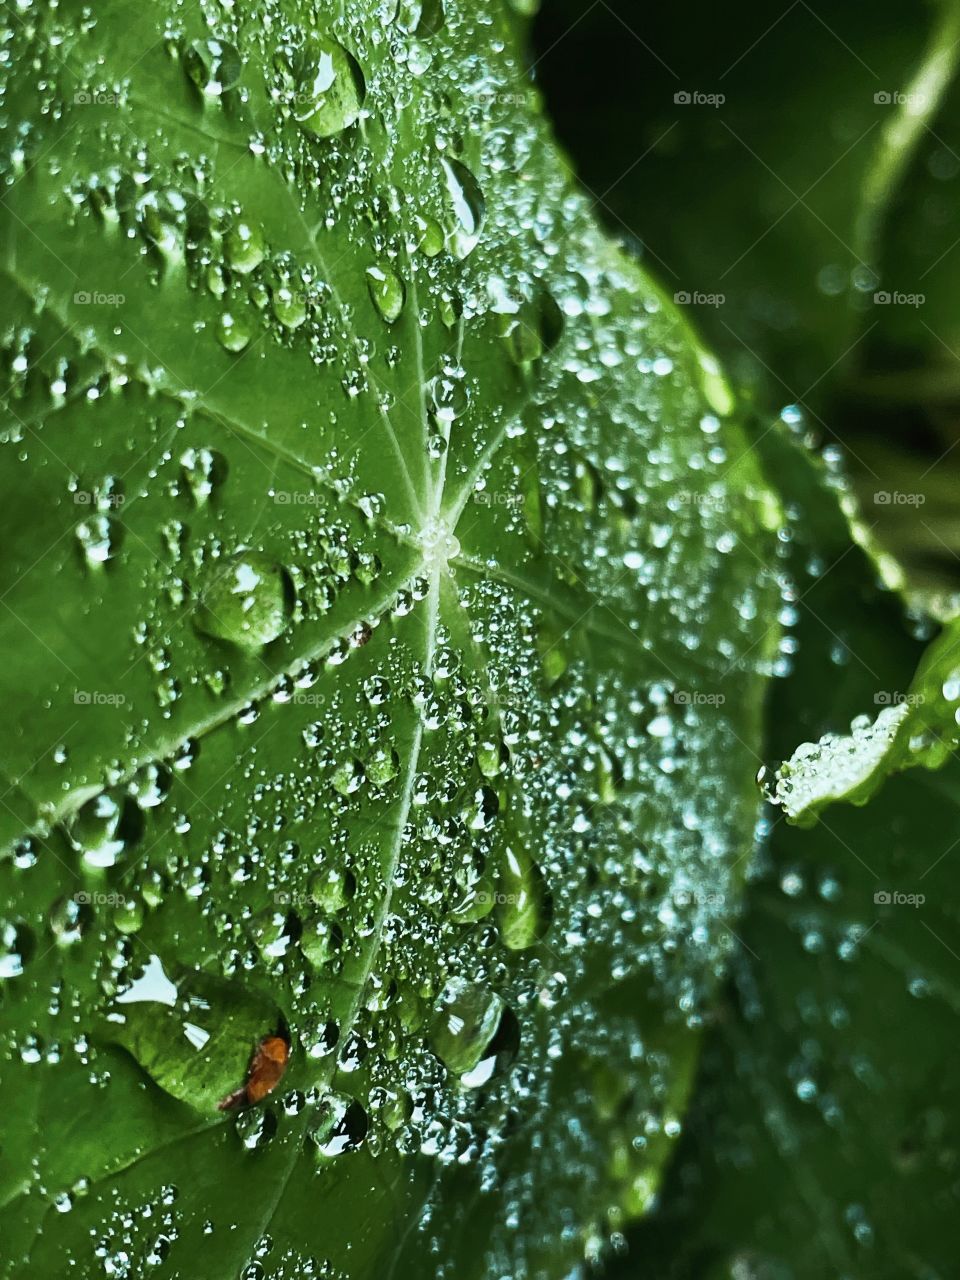 Water droplets bubbles splashes raindrops waterdrops plant green leaves leafs greenery botany phone photography rain shower rainy dew dewdrops wet outdoors nature storm 